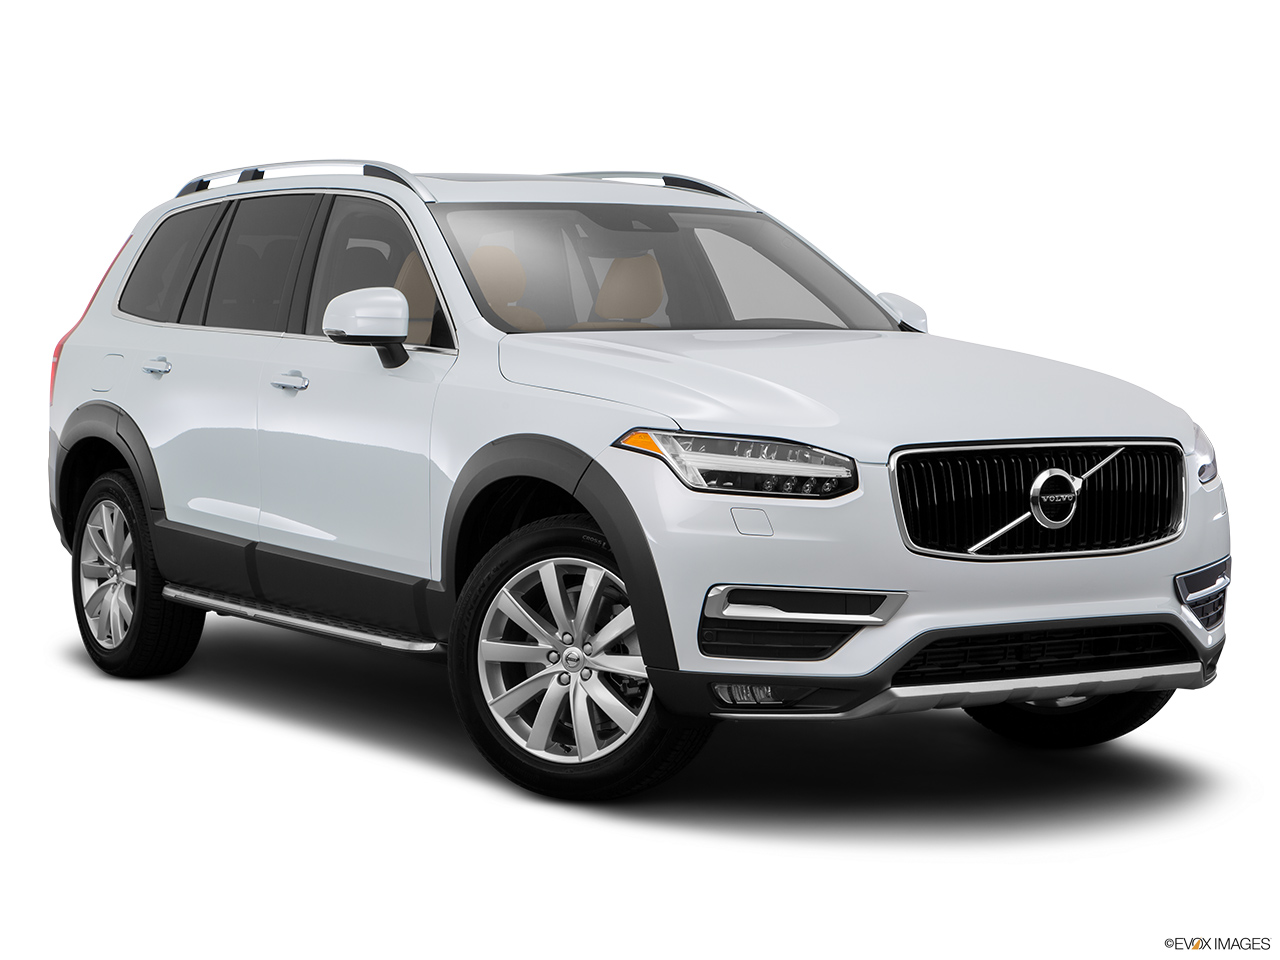 2016 Volvo XC90 T6 AWD Front passenger 3/4 w/ wheels turned. 